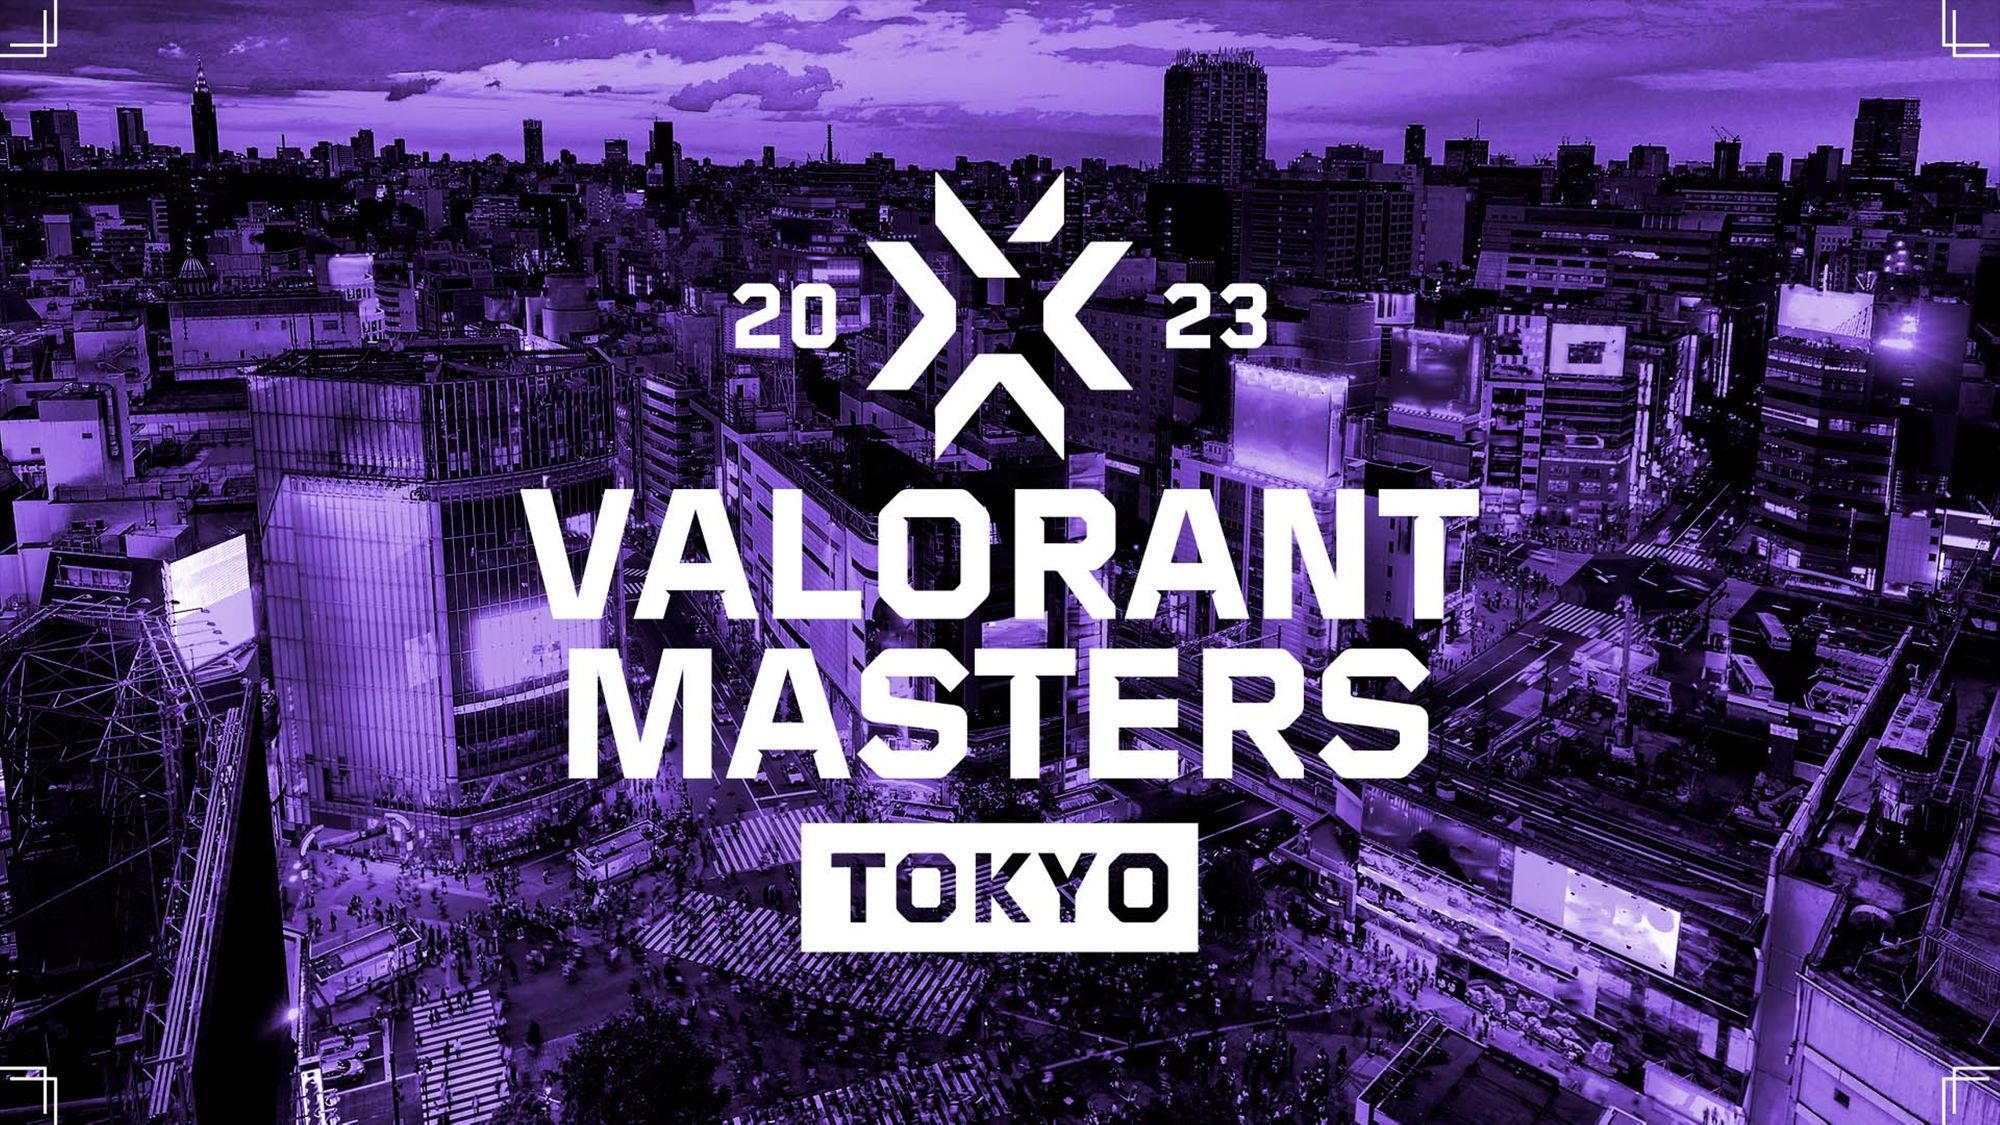 All VALORANT Teams Qualified for Masters Tokyo TRN Checkpoint